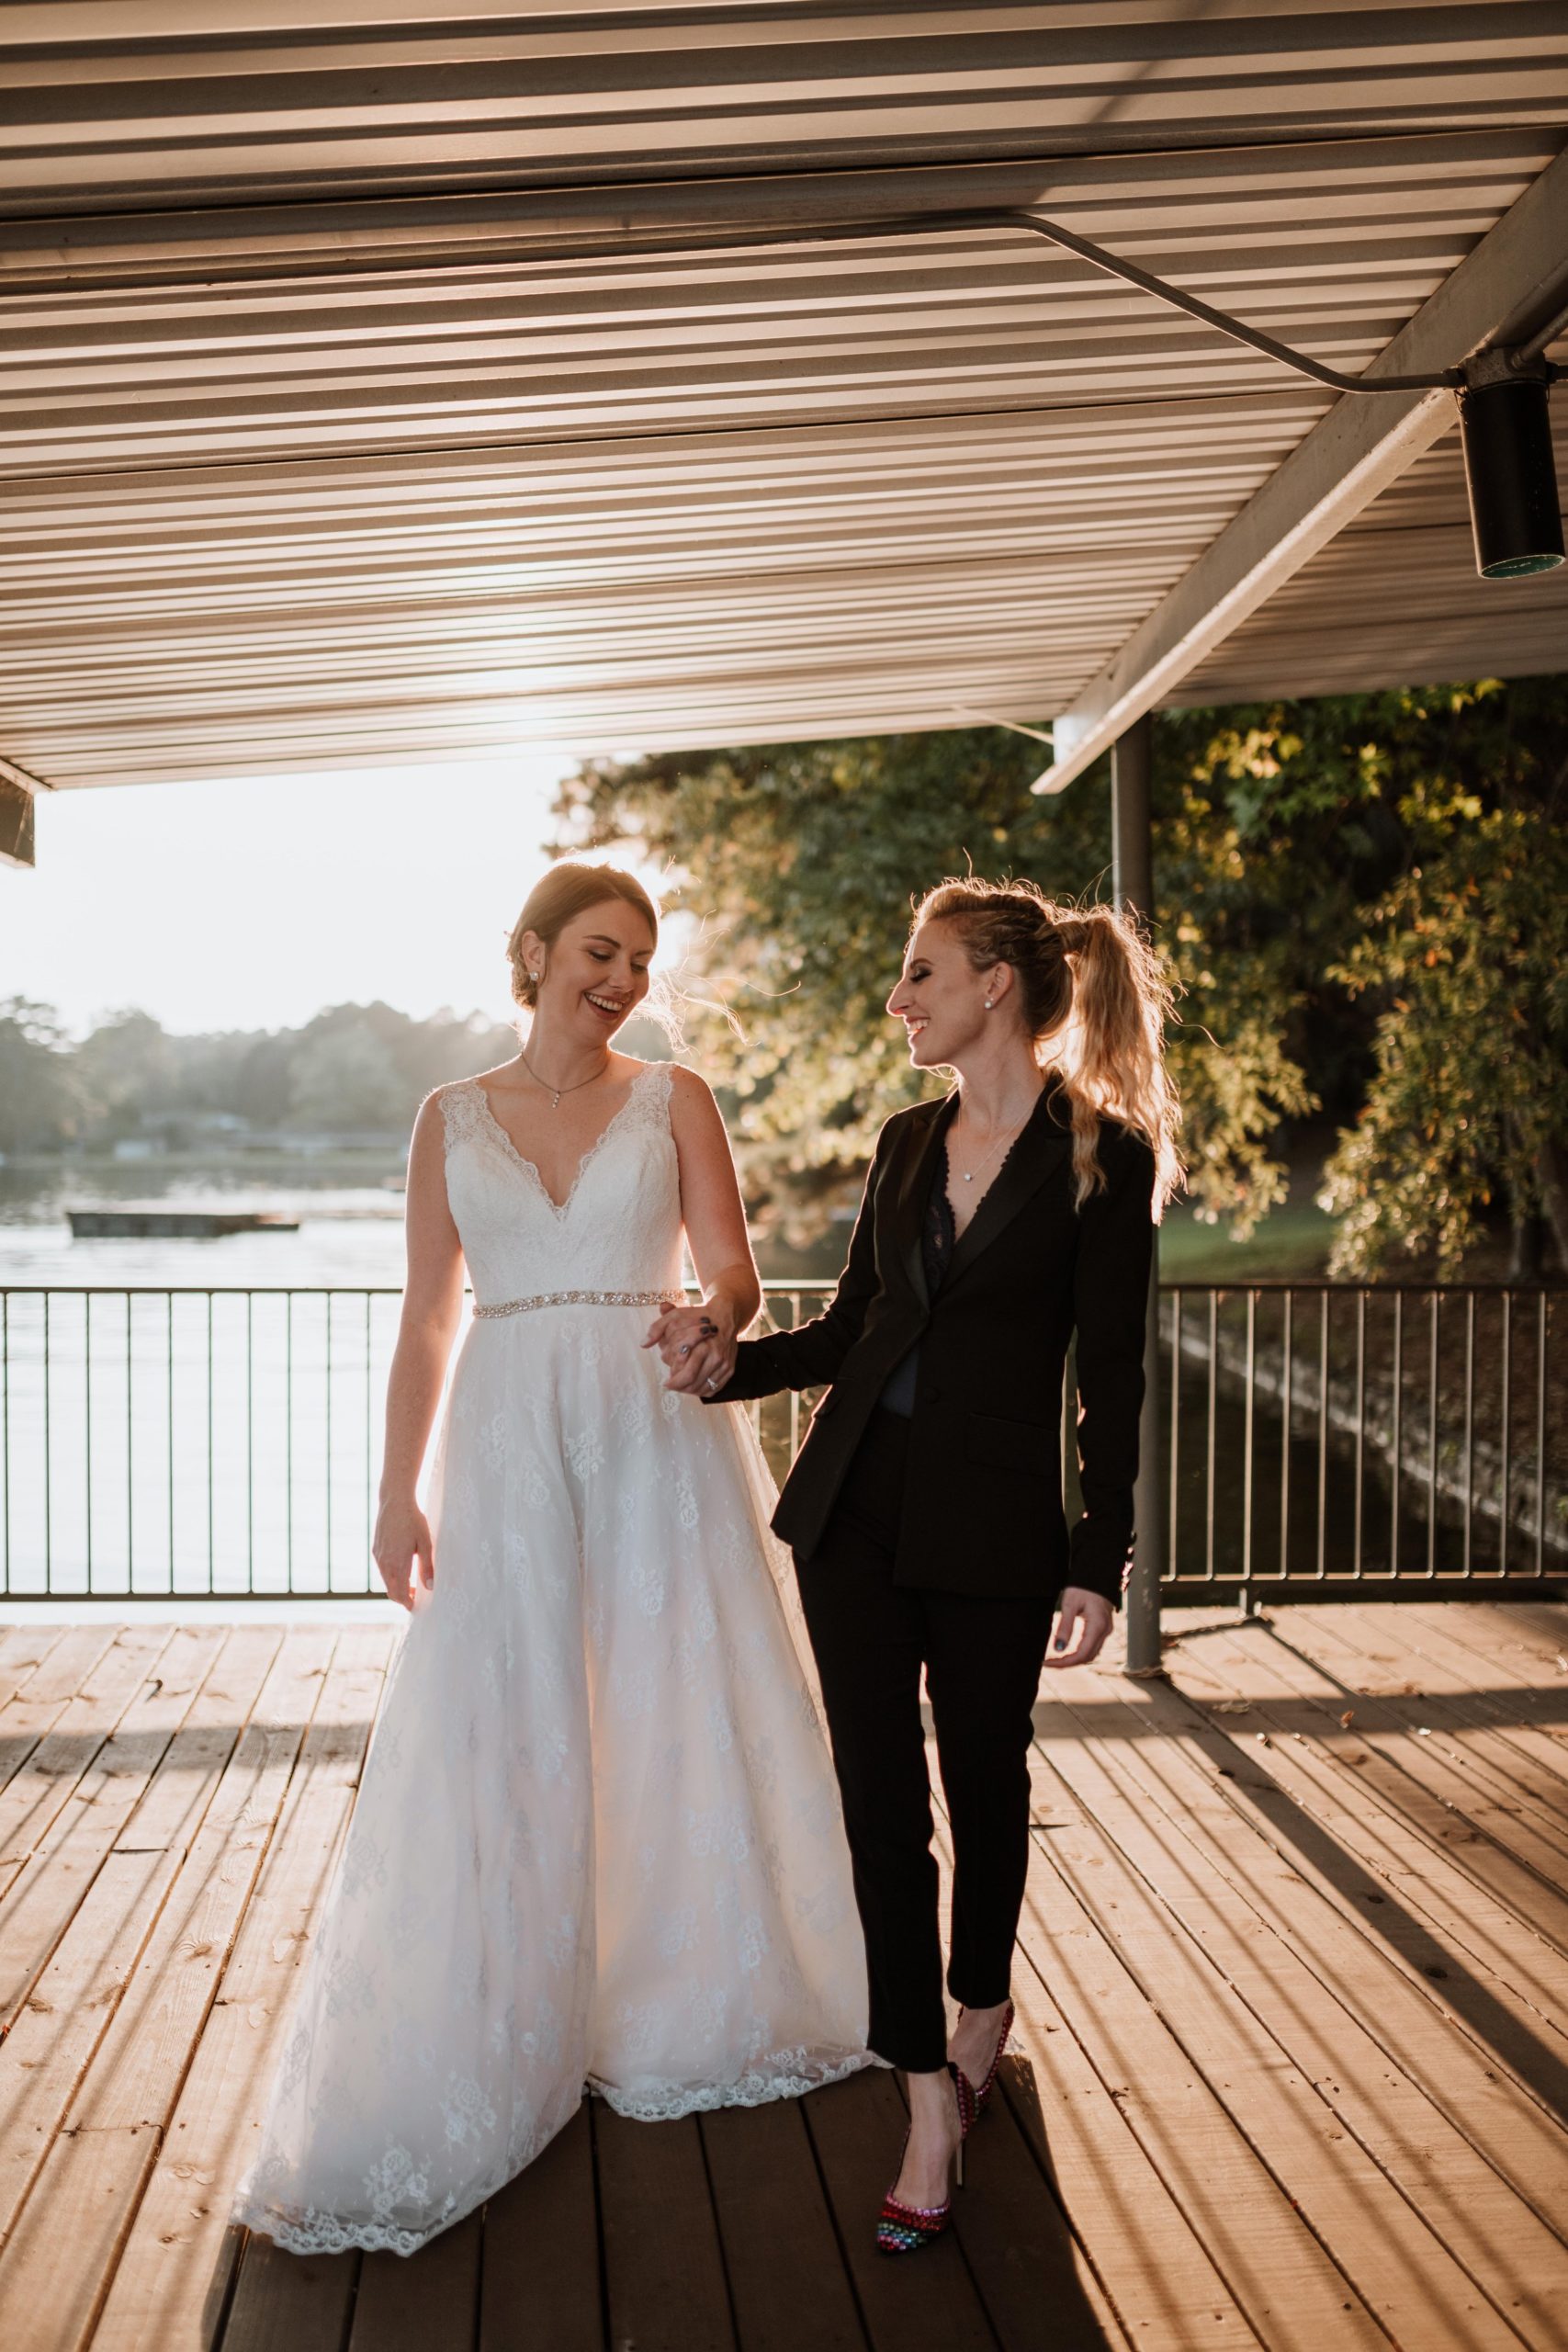 Lesbian newlywed couple walking together along a dock at sunset.